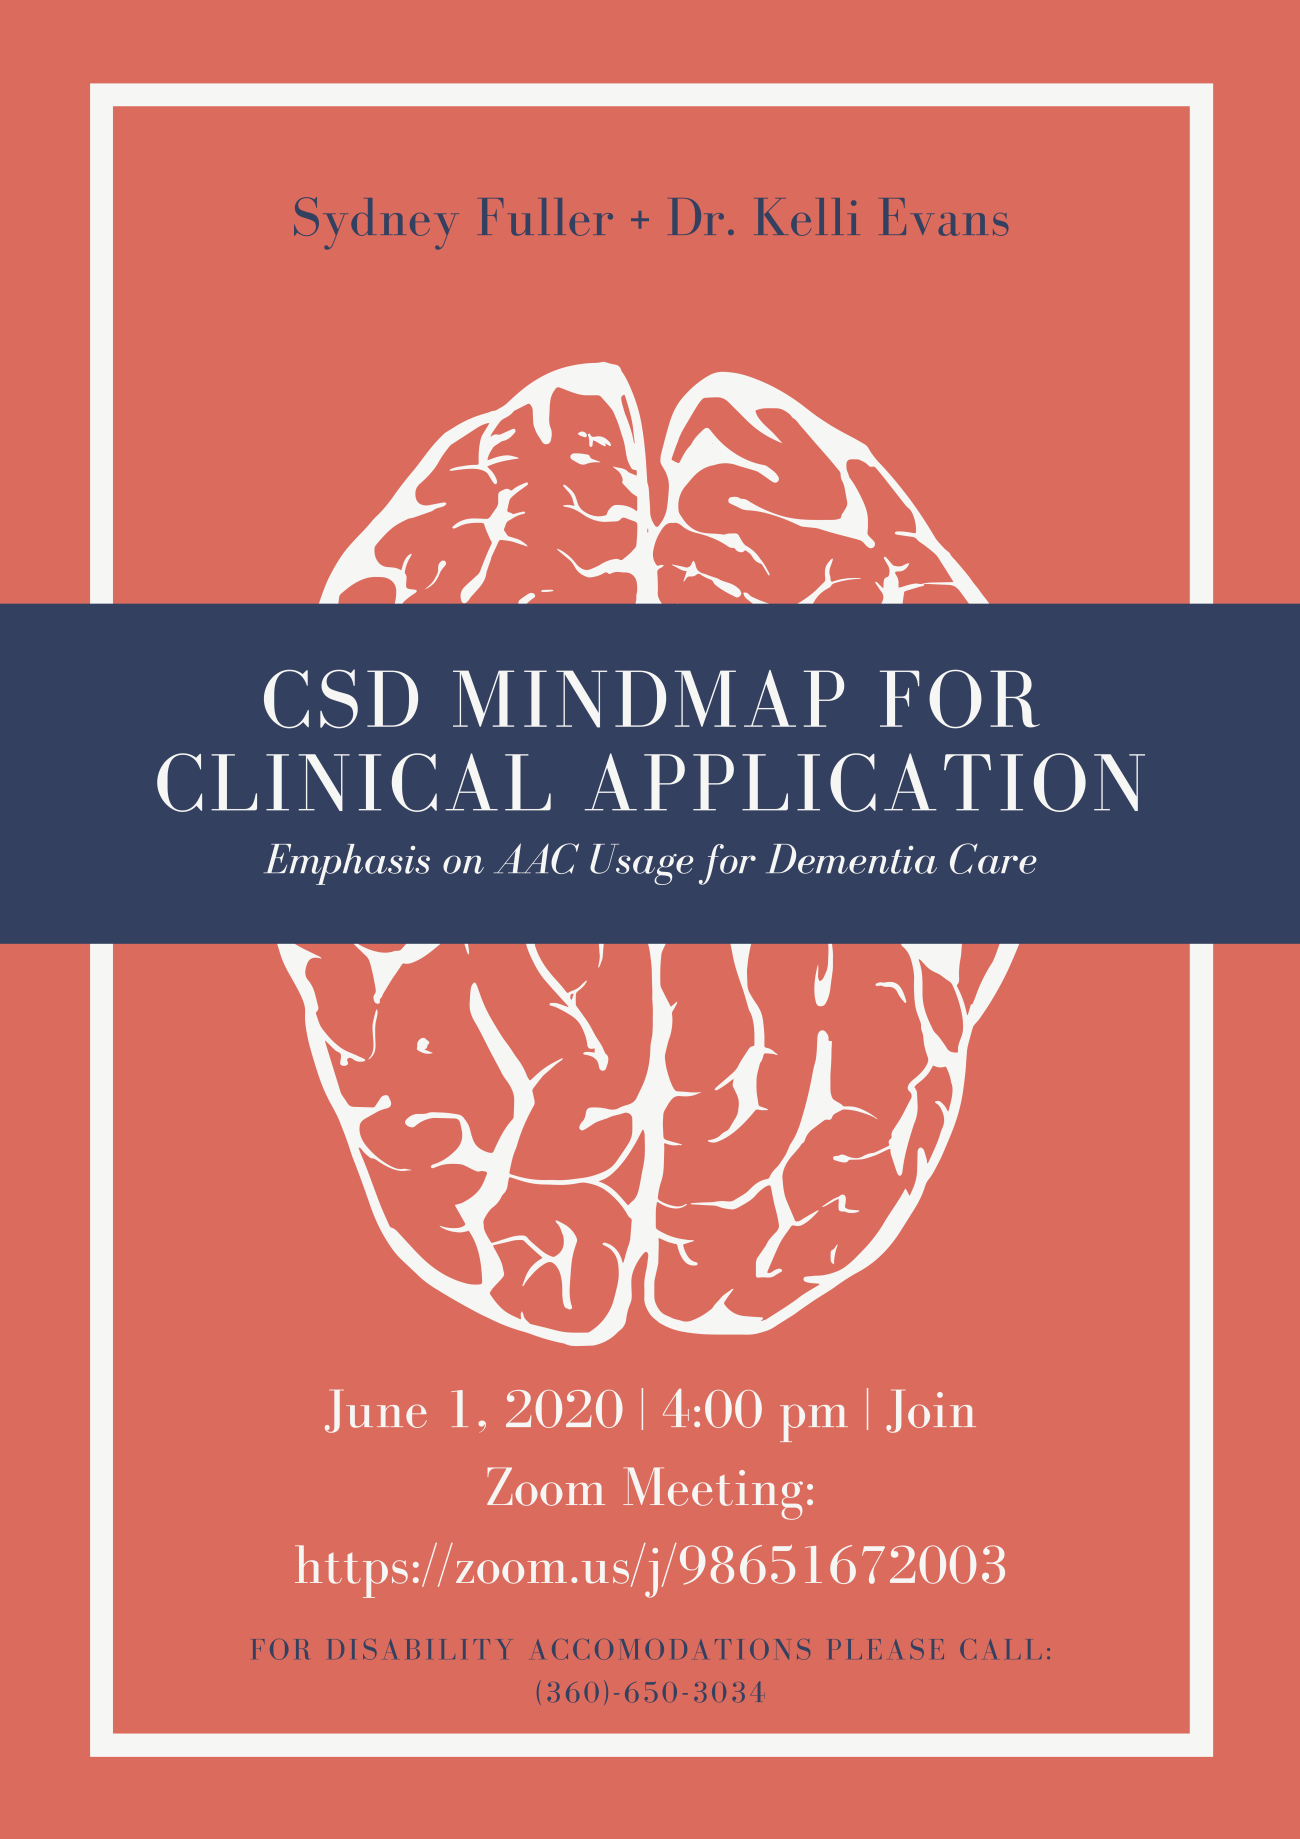 Image: A graphic of the anatomy of the brain.   Text reads " CSD Mindmap for Clinical Application, Emphasis on AAC Usage for Dementia Care, Dr. Kelli Evans"  " June 1, 2020 | 4:00 pm | Join Zoom Meeting: https://zoom.us/j/98651672003"  "For disability accommodations please call (360) 650-3034"